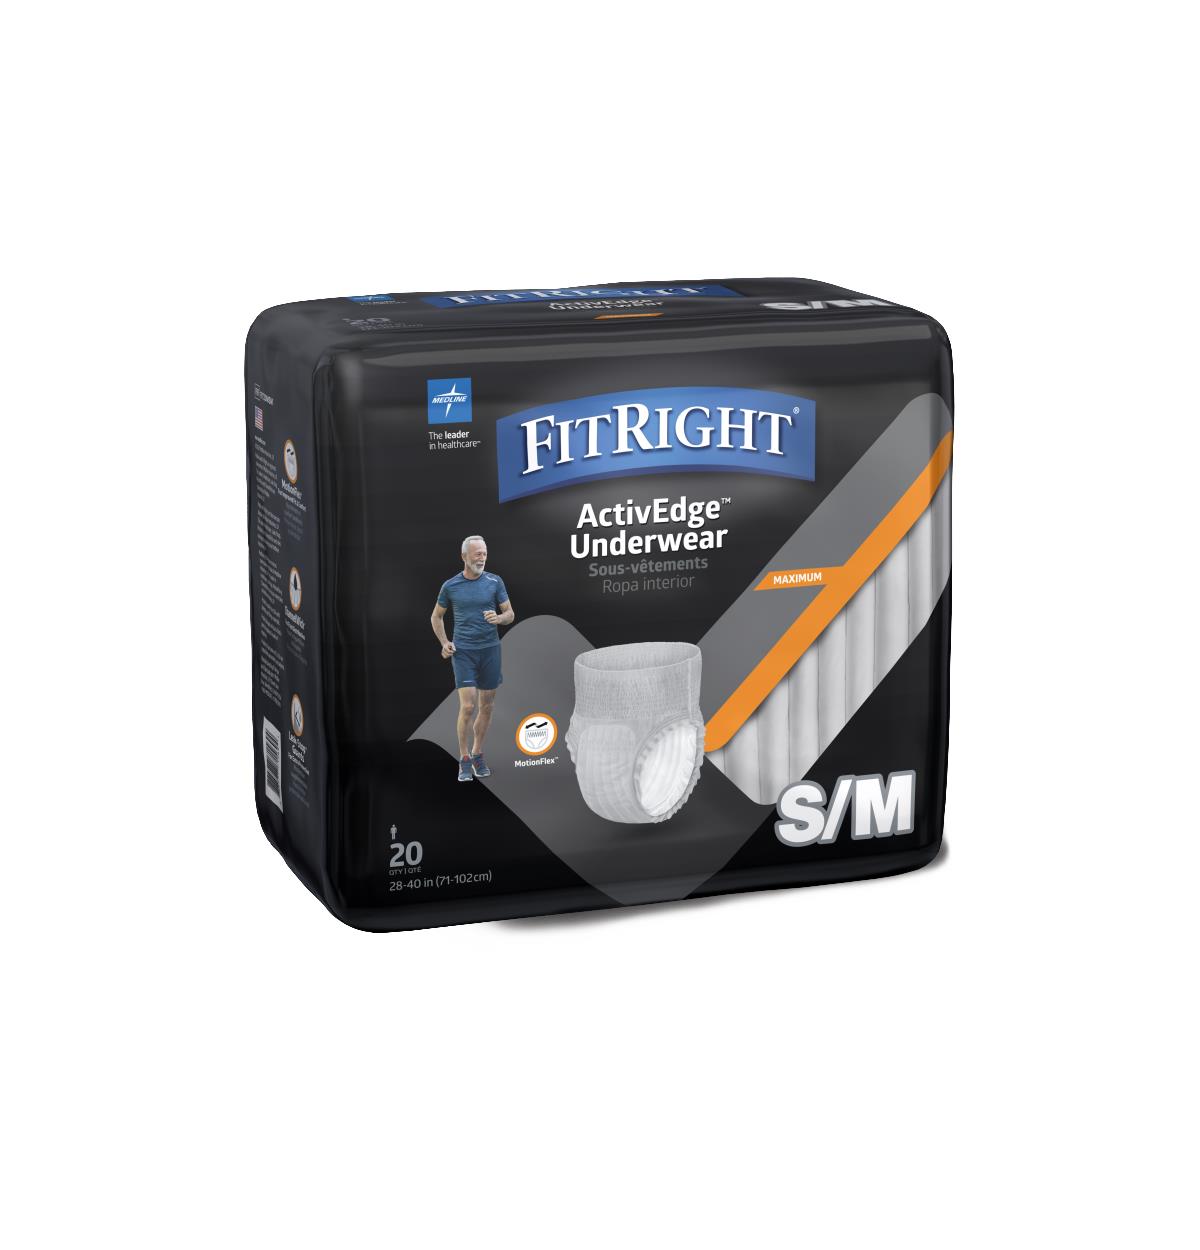  FitRight Super Protective Incontinence Underwear